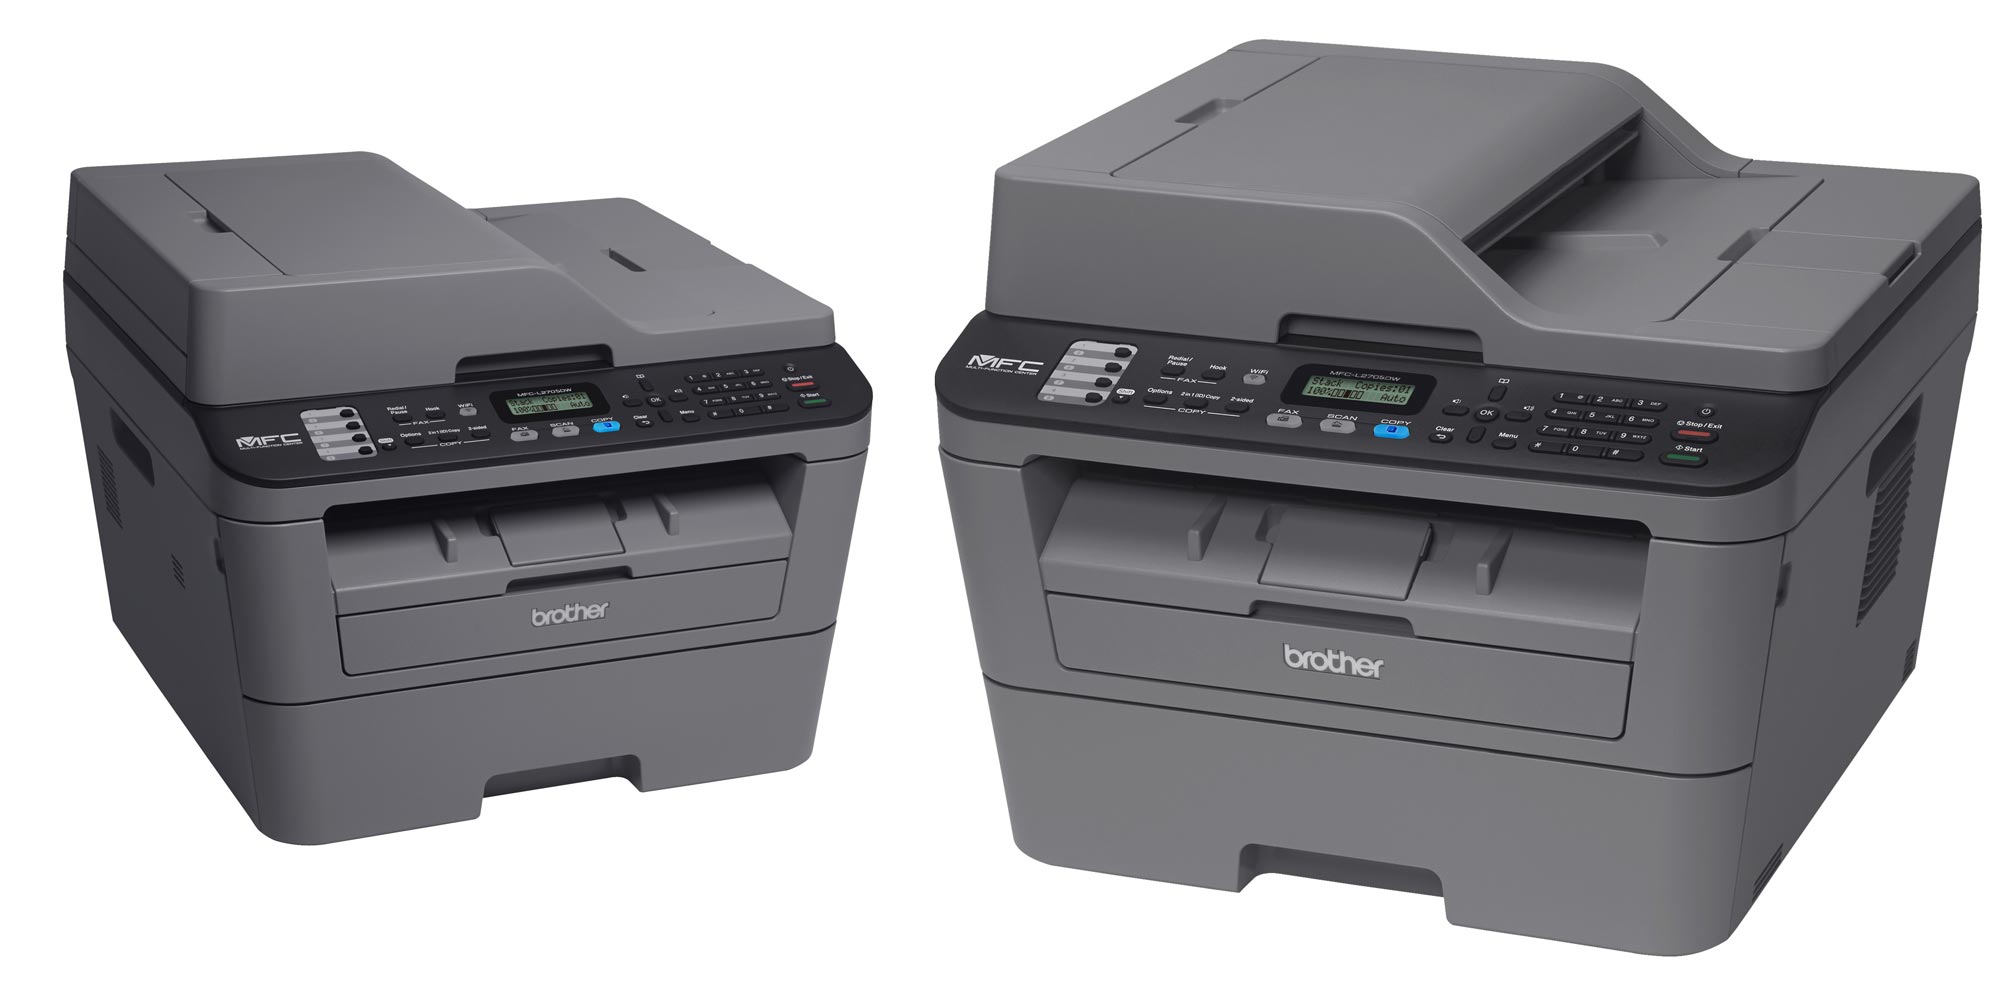 brother mfc j4510dw printer will not scan